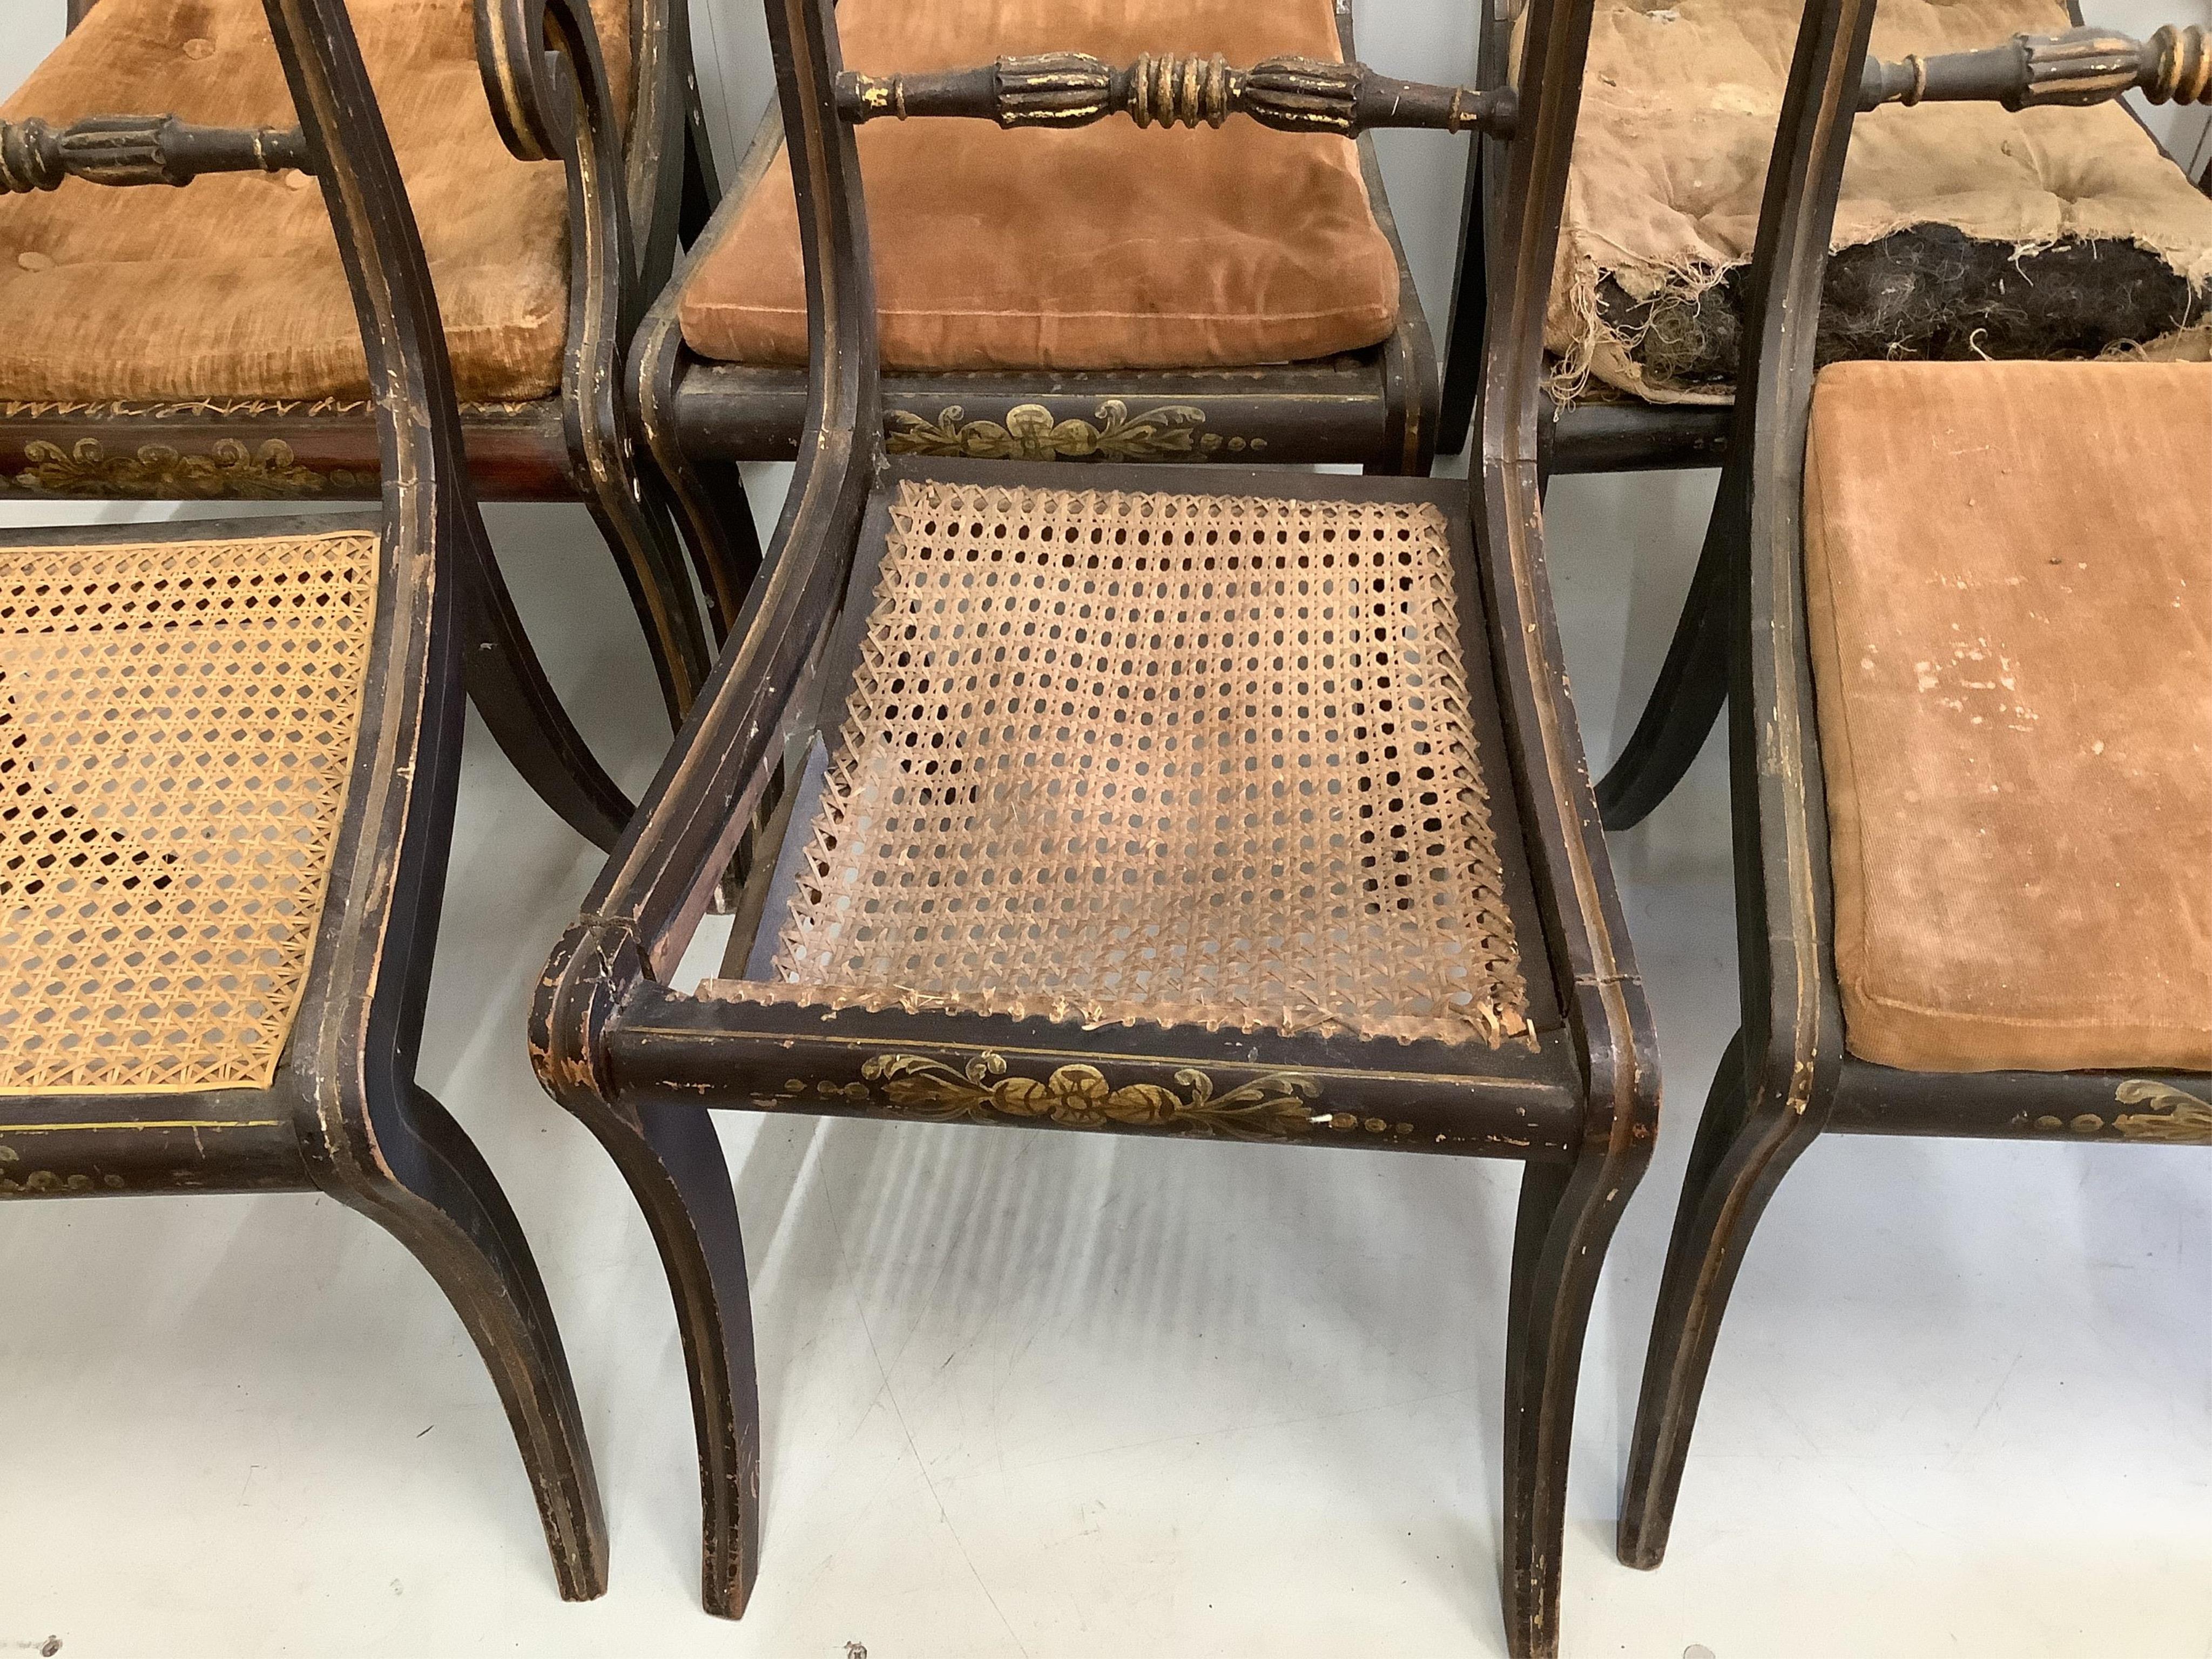 A set of eight Regency painted cane seat dining chairs, two with arms (in need of restoration)